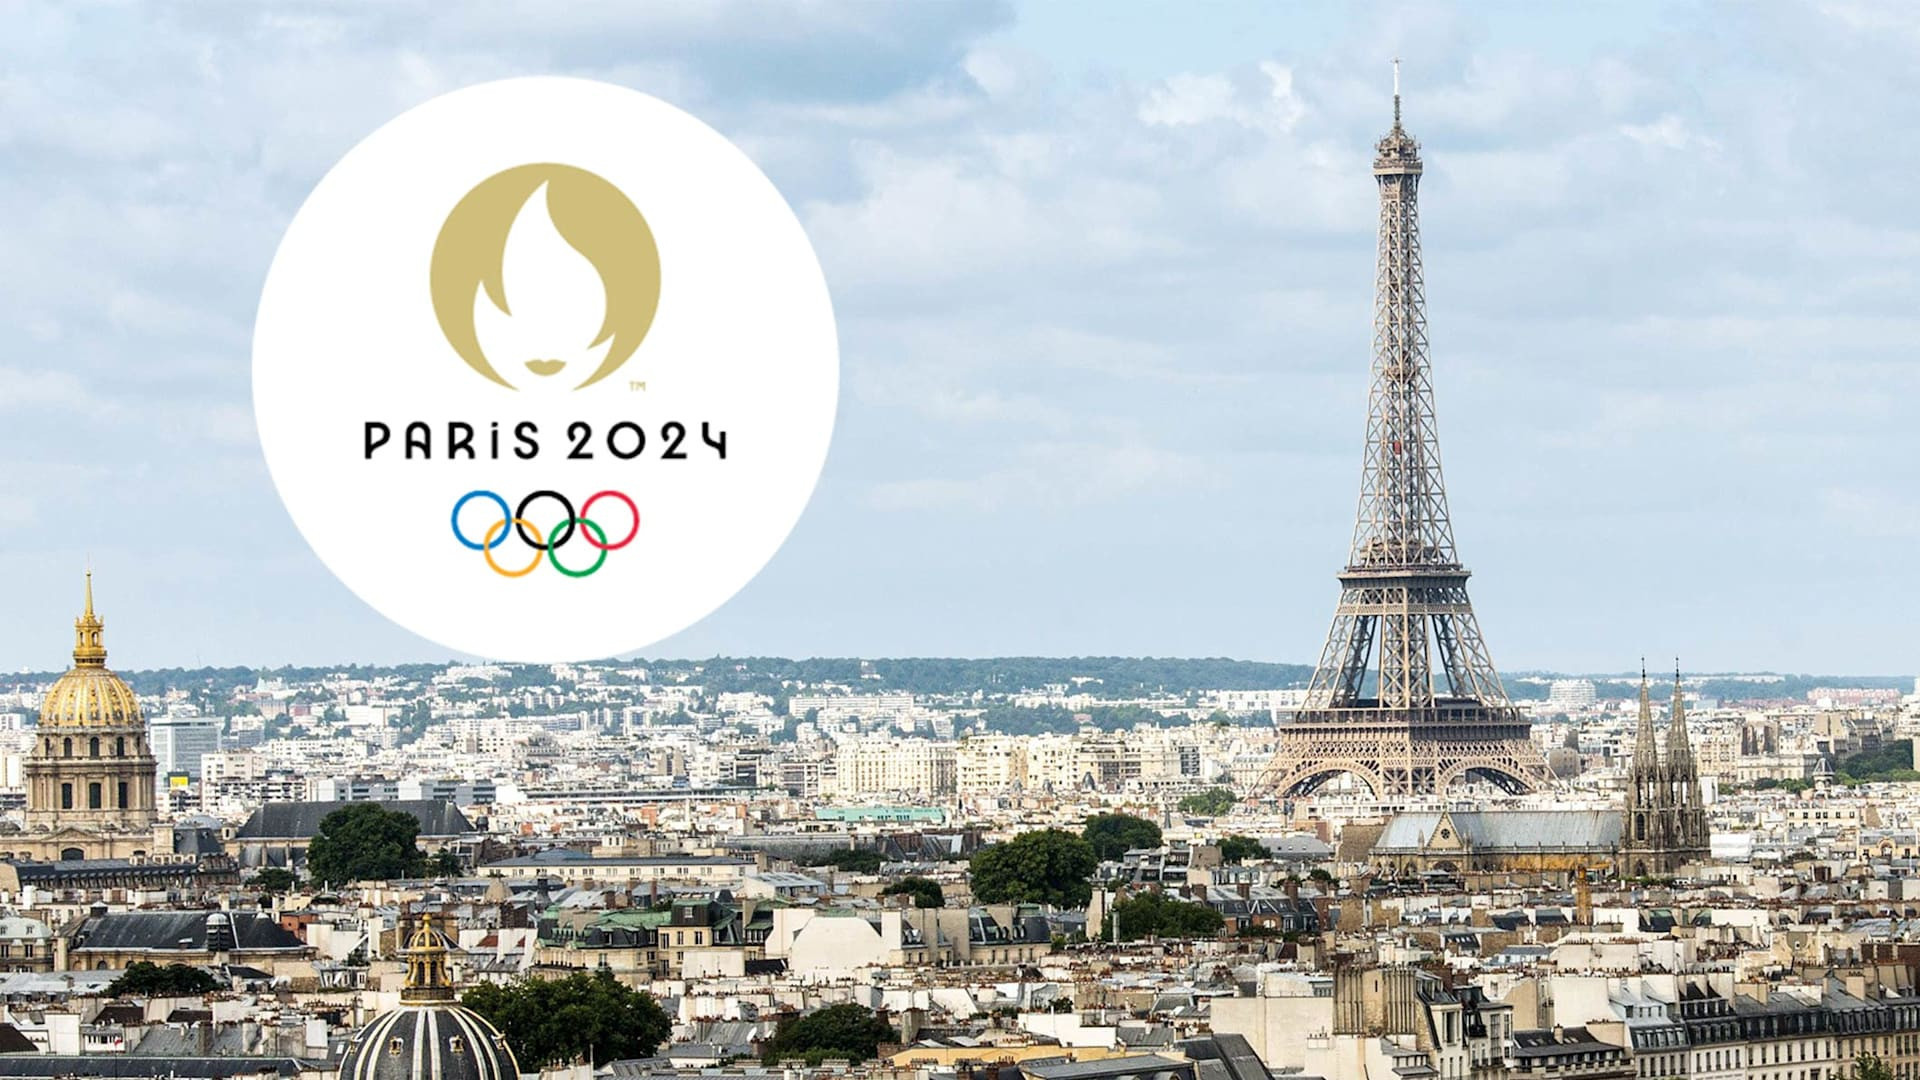 Paris 2024 may end up offering more than 13.4 million tickets for sale once the final sessions for the Olympic and Paralympic programmes have been settled ©Paris 2024